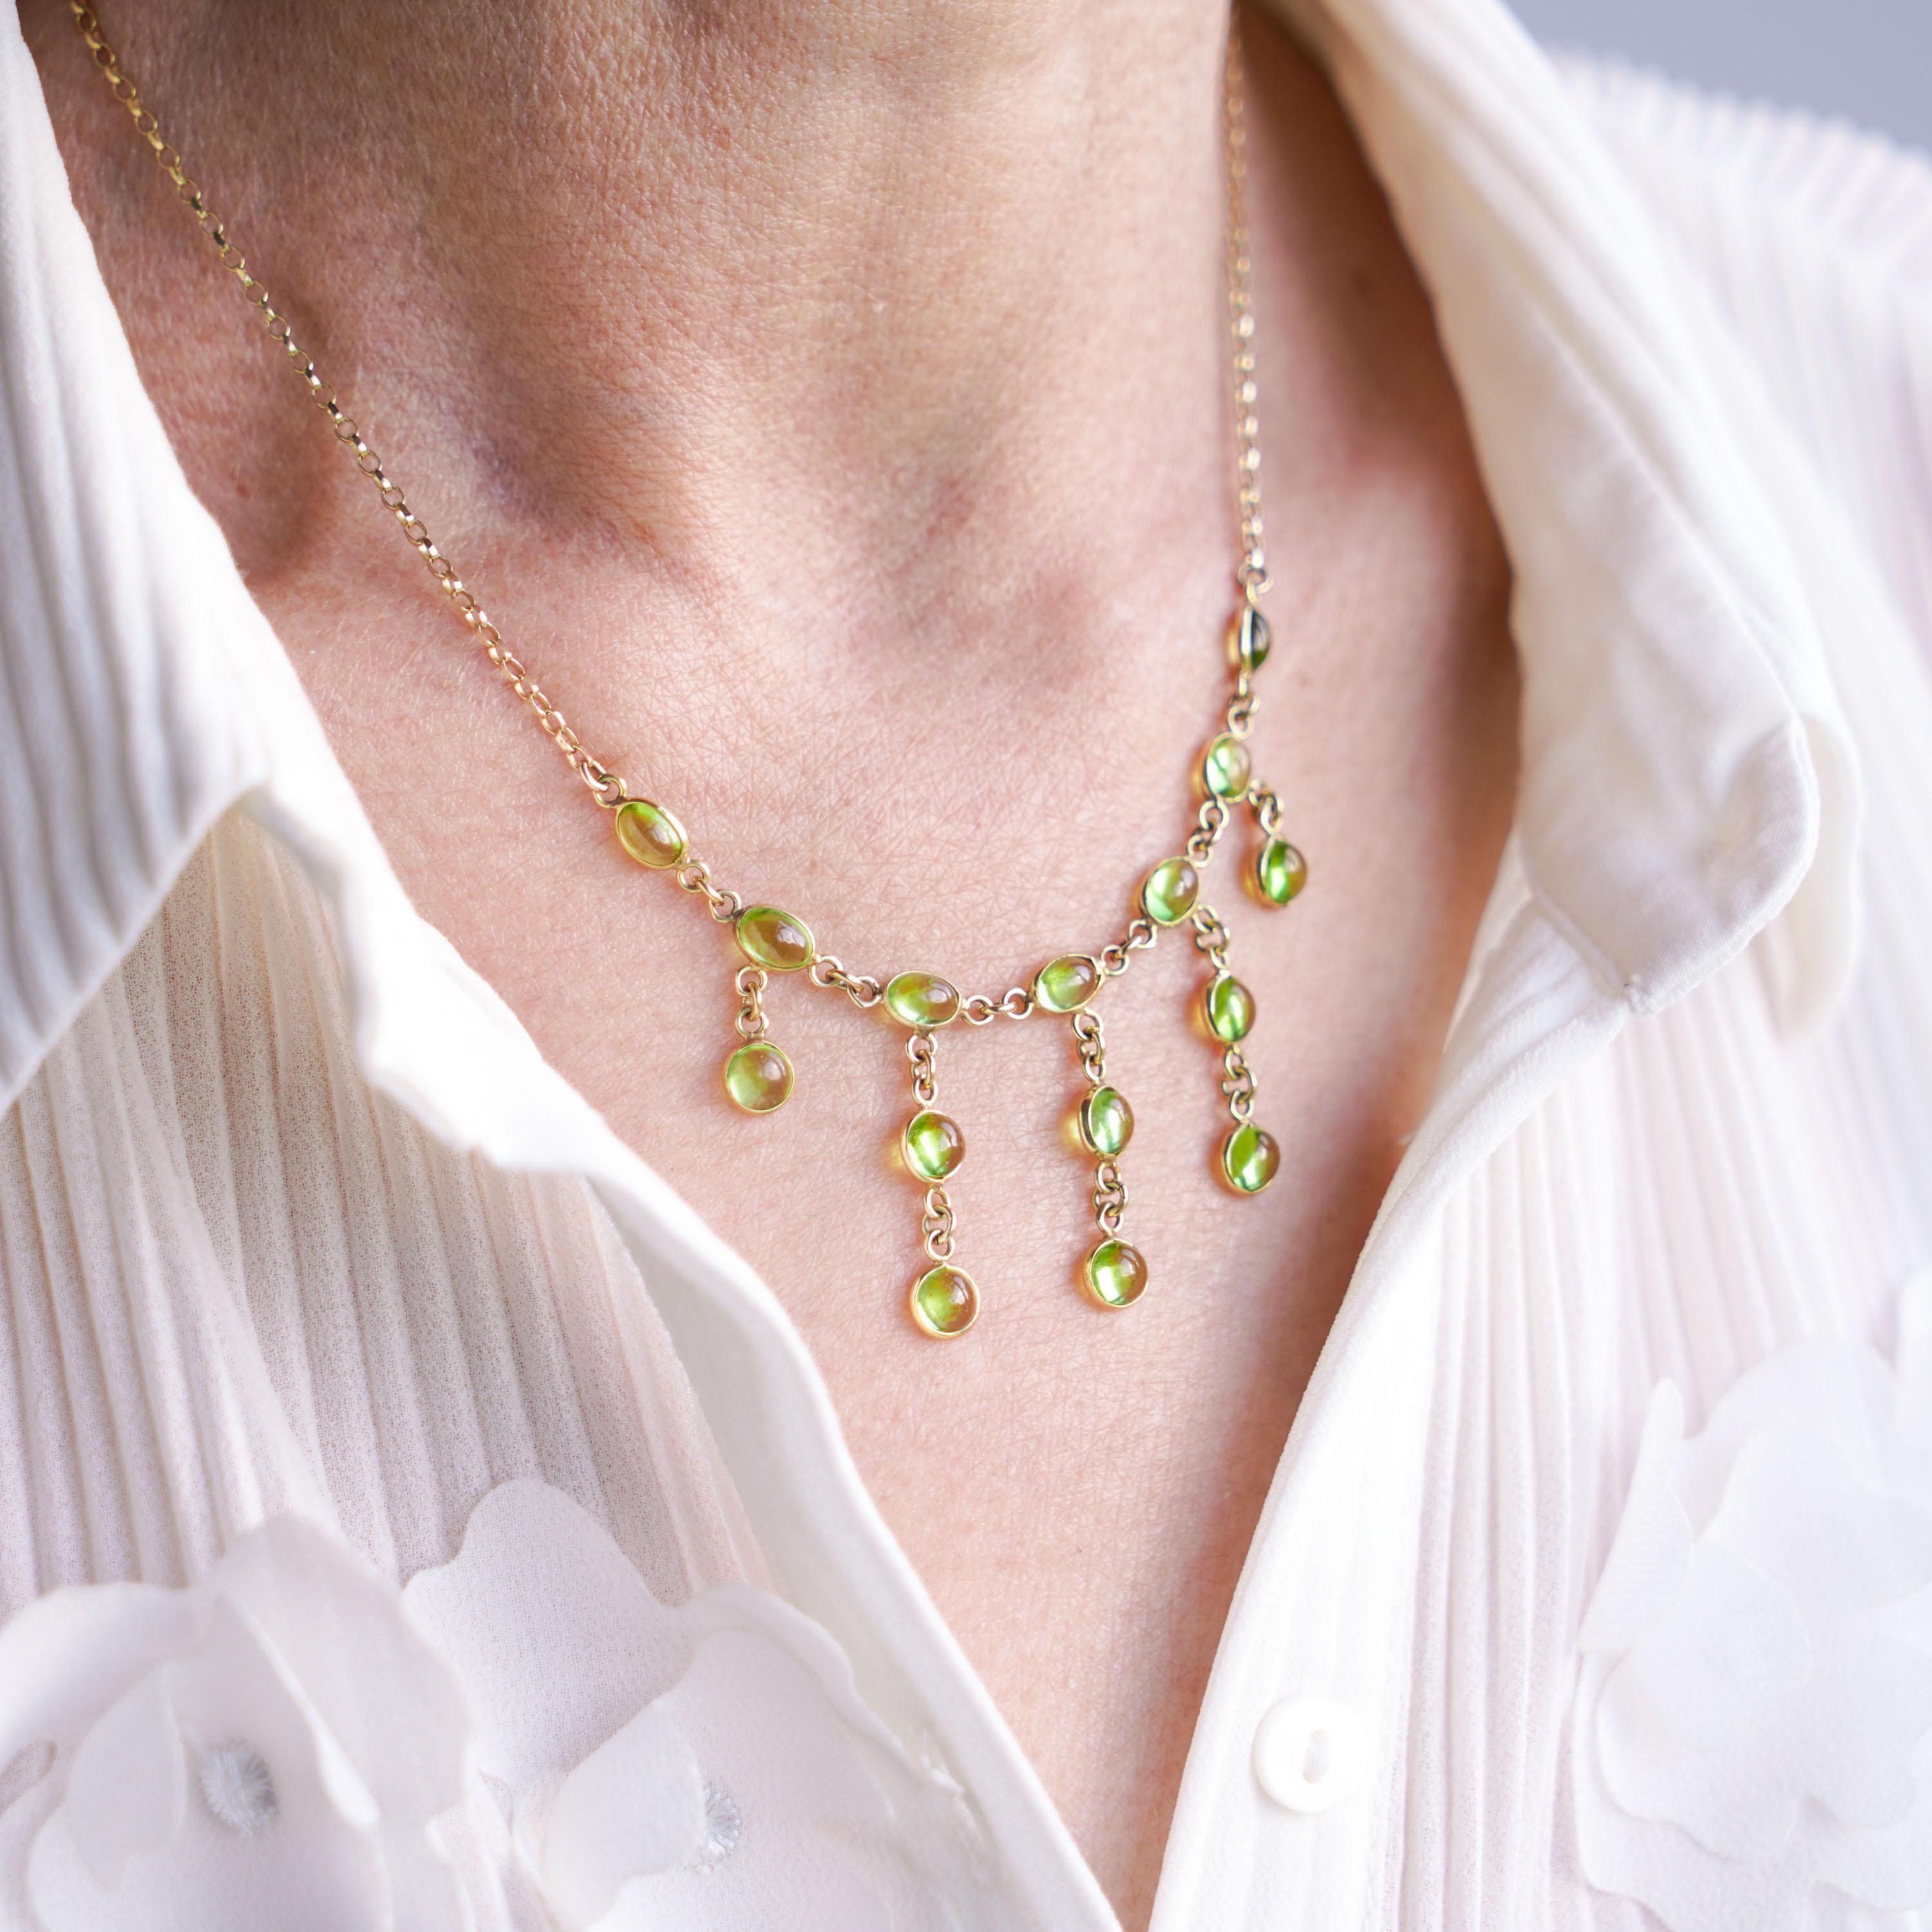 We are delighted to offer this exquisite vintage 9K gold peridot necklace.
 
The necklace features a very elegant cascade drop design with a tiered structure of beautiful half-cut peridot cabochons. 
 
Each gem has a wonderful and iconic light green